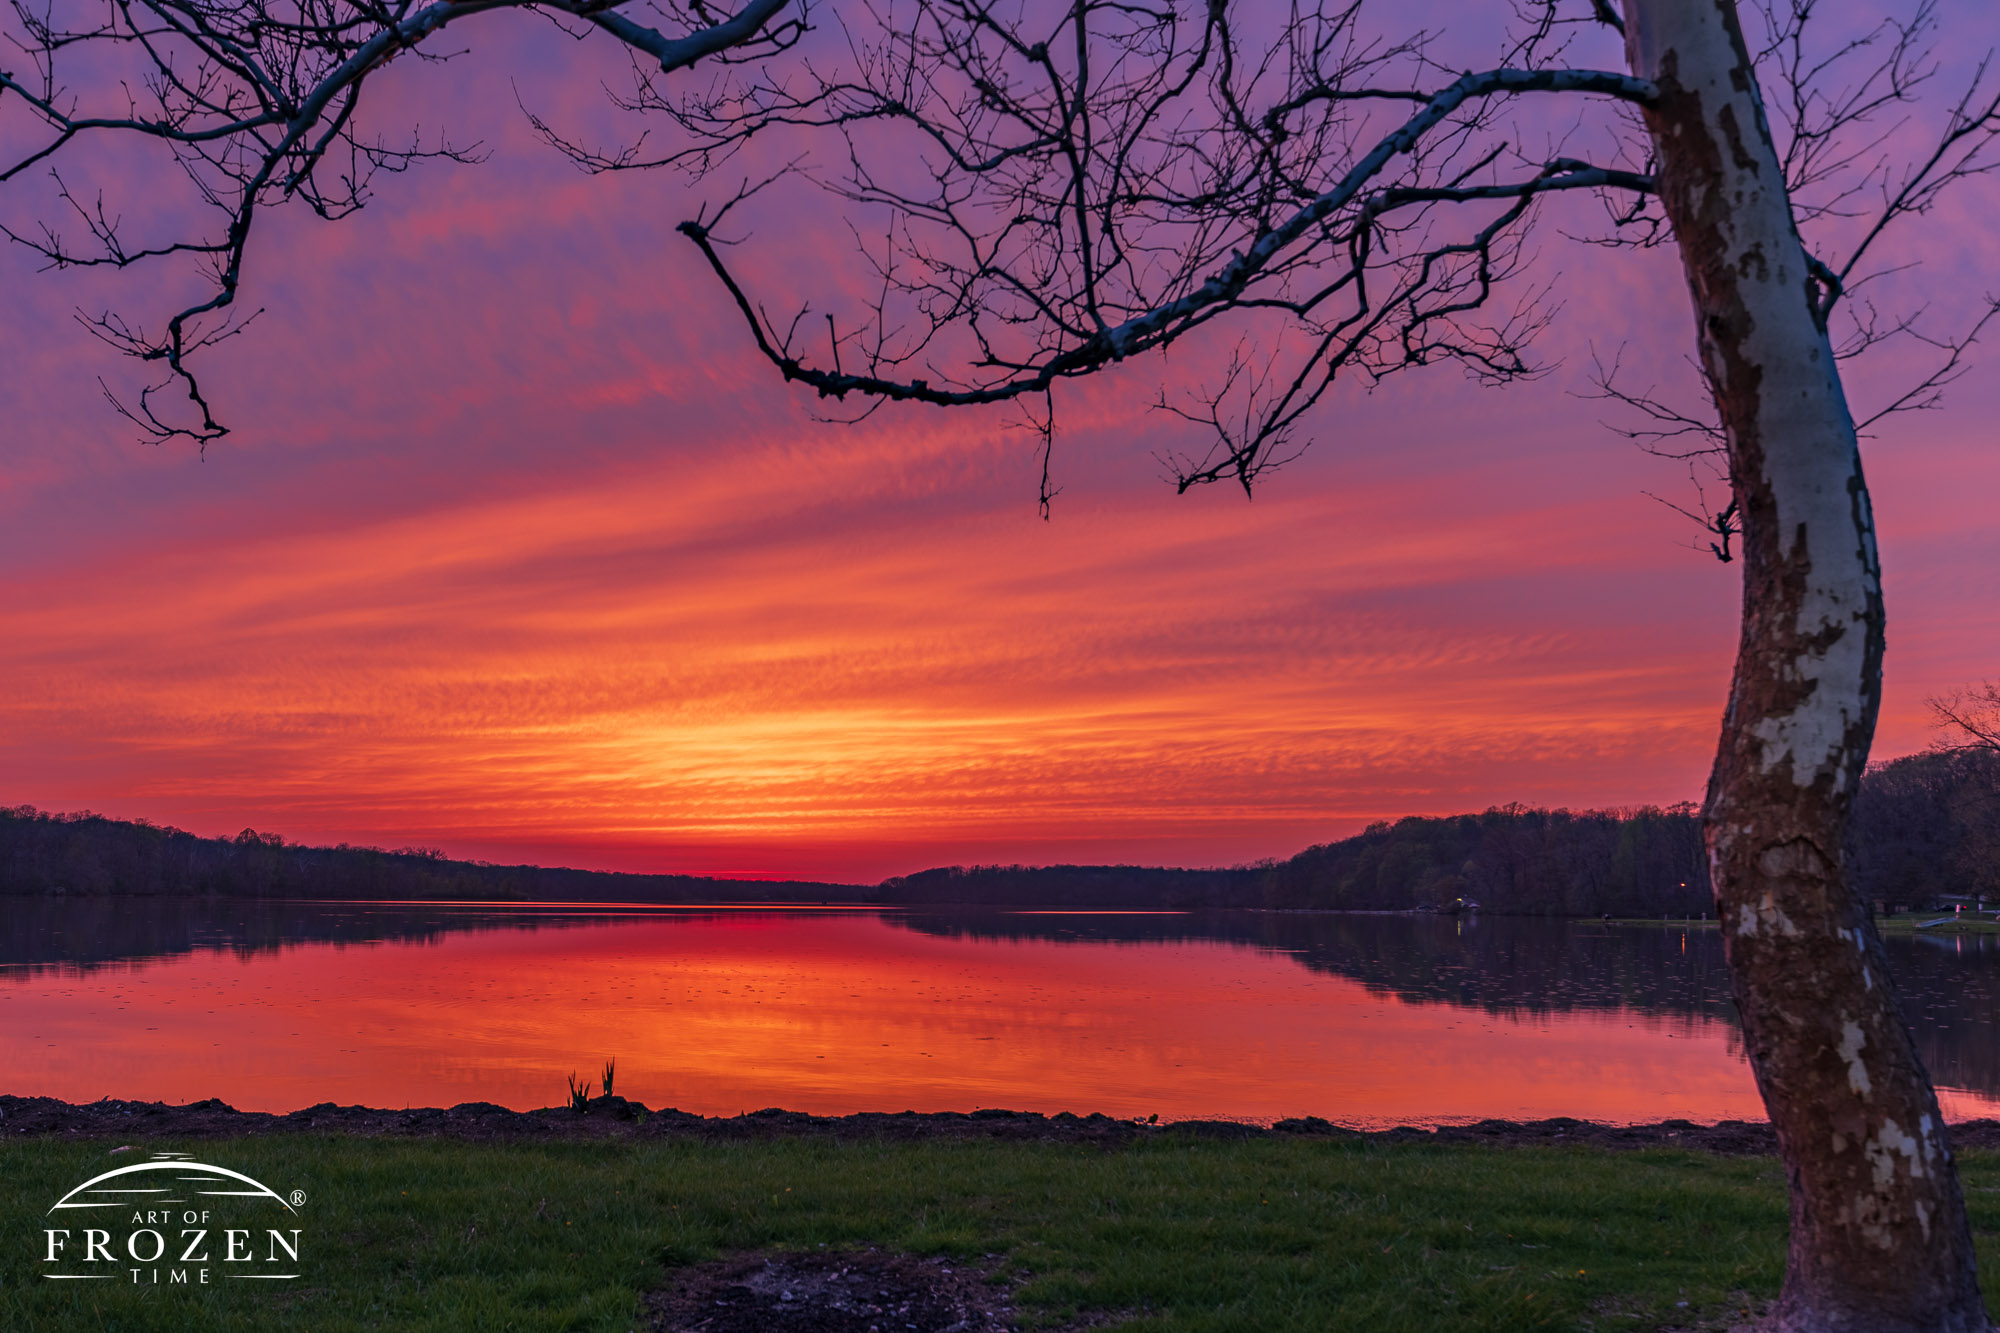 A cloud-filled sunset turns colorful as twilight deepens over Kiser Lake where the calm waters reflect the sky above.